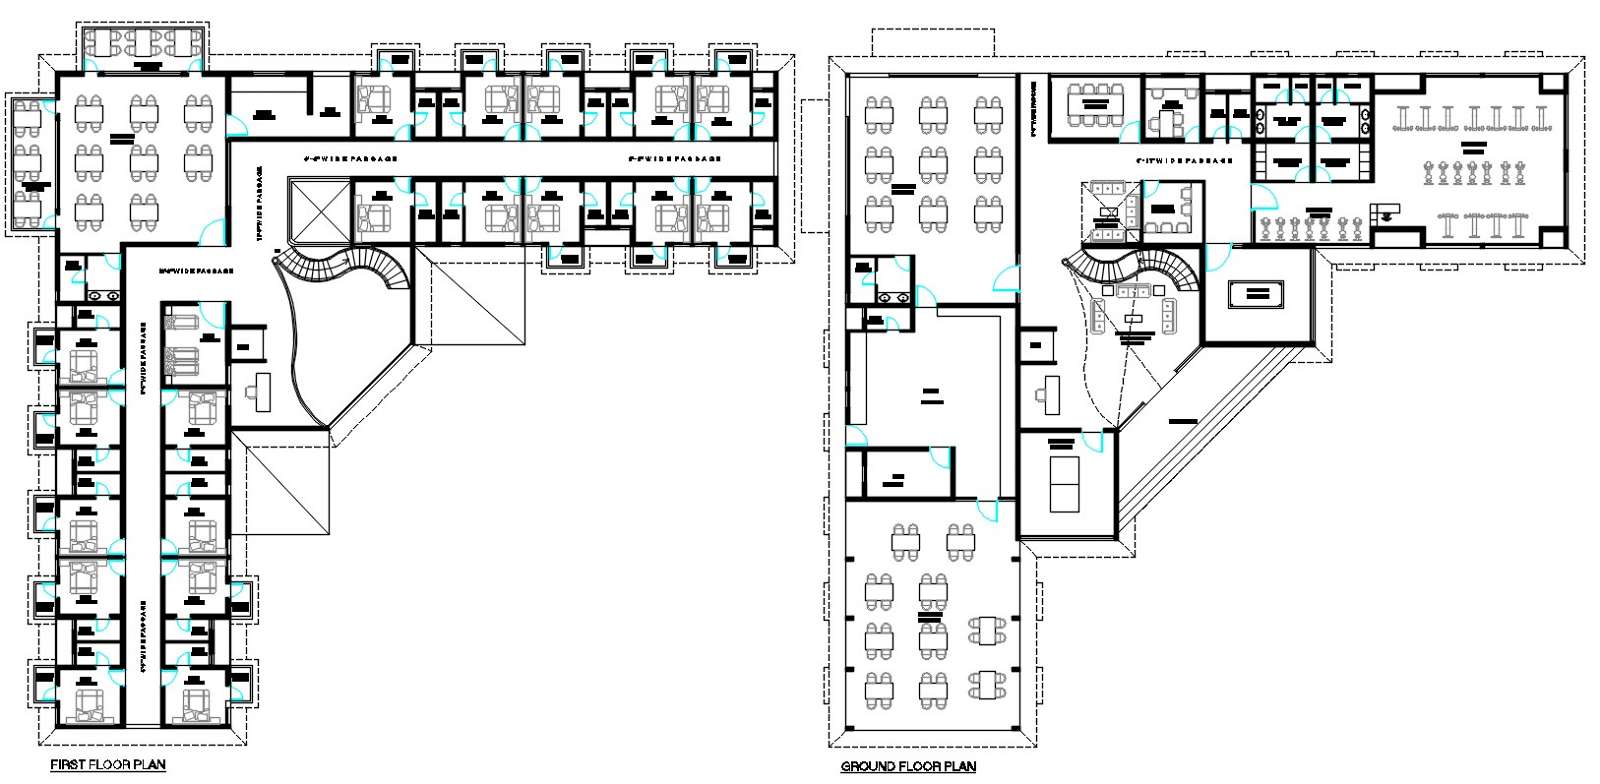 Hotel Building Area Layout Plan And Structure Cad Drawing Details Dwg